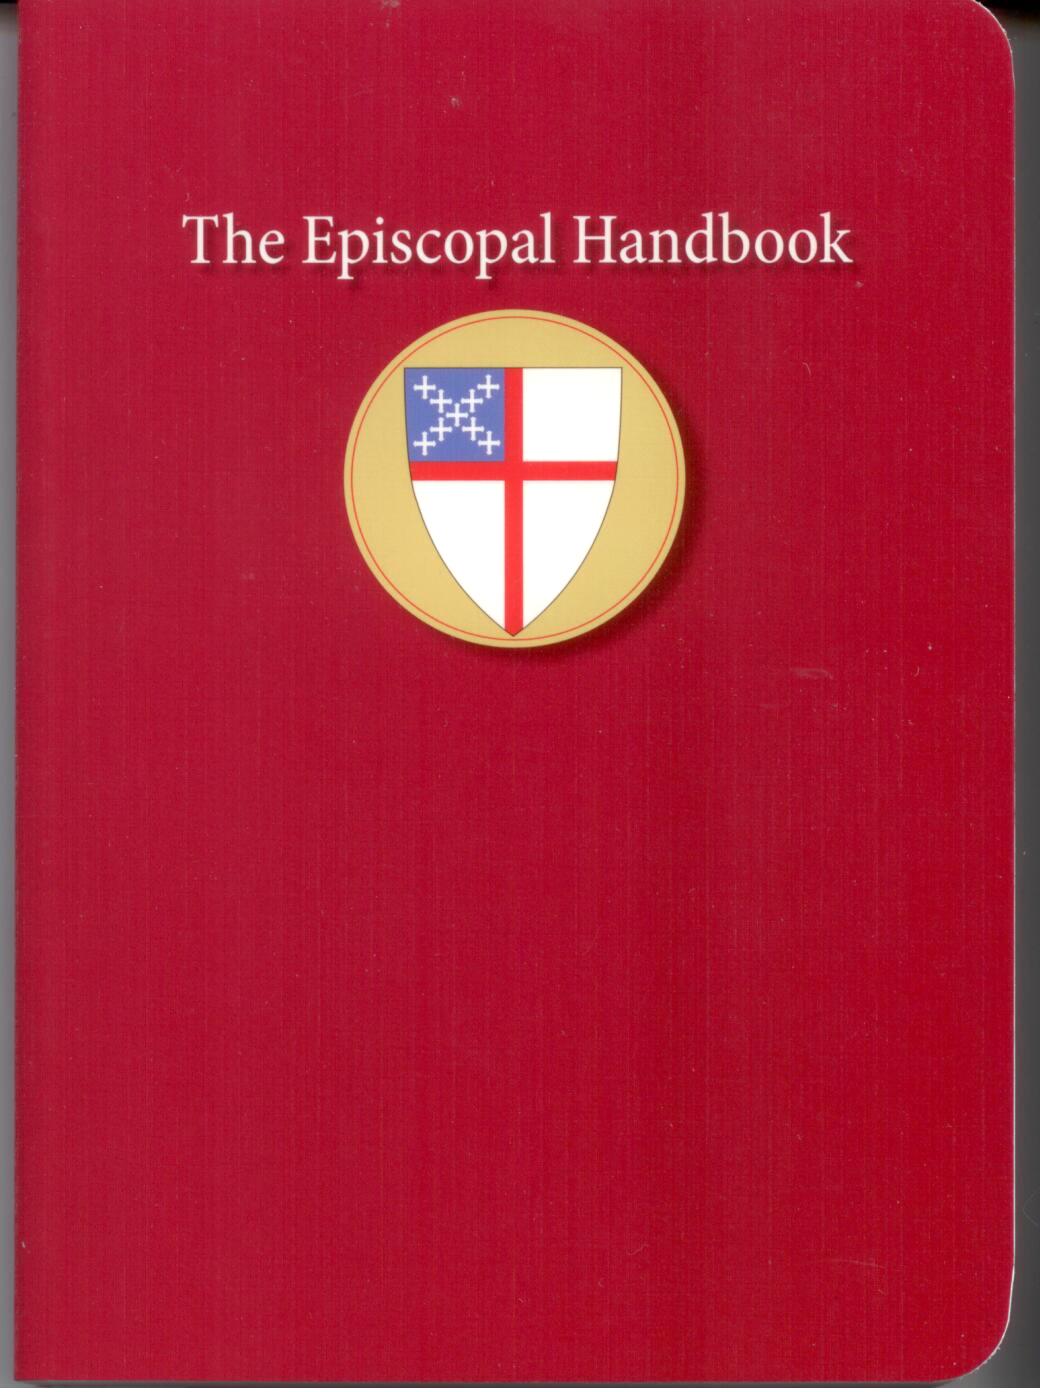 The Episcopal Handbook by Morehouse Publishing 108-9780819229564